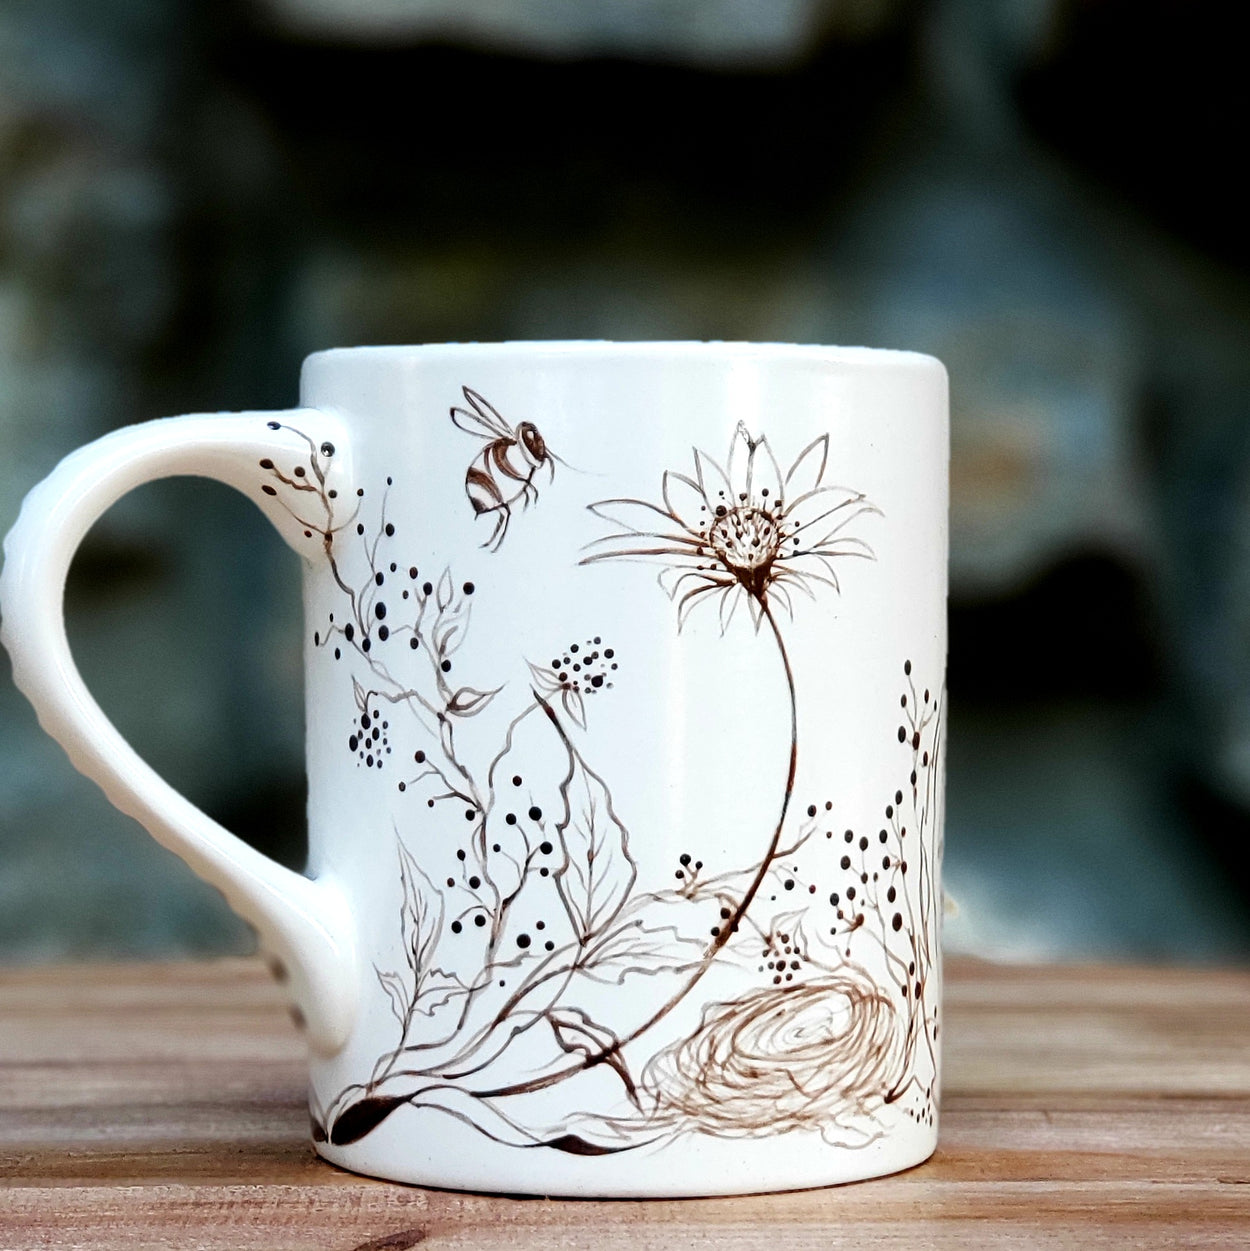 Hand painted woodland design mug.. original design with fox and birds nest and bees and butterflies fluttering about in a whimsical scene that covers this beautiful piece. 16 oz kiln fired mug with satin glaze